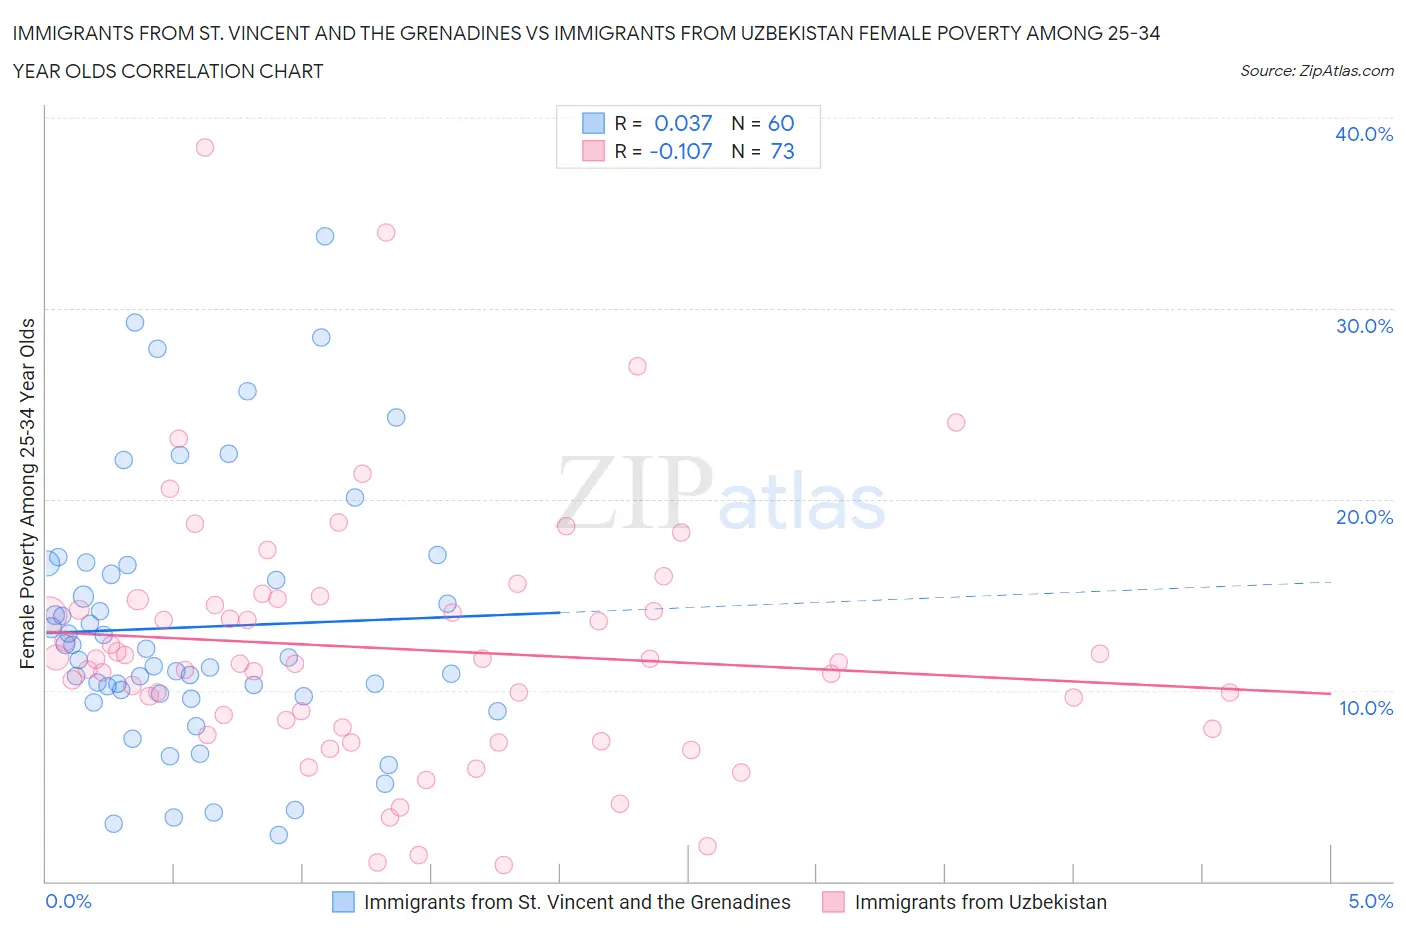 Immigrants from St. Vincent and the Grenadines vs Immigrants from Uzbekistan Female Poverty Among 25-34 Year Olds